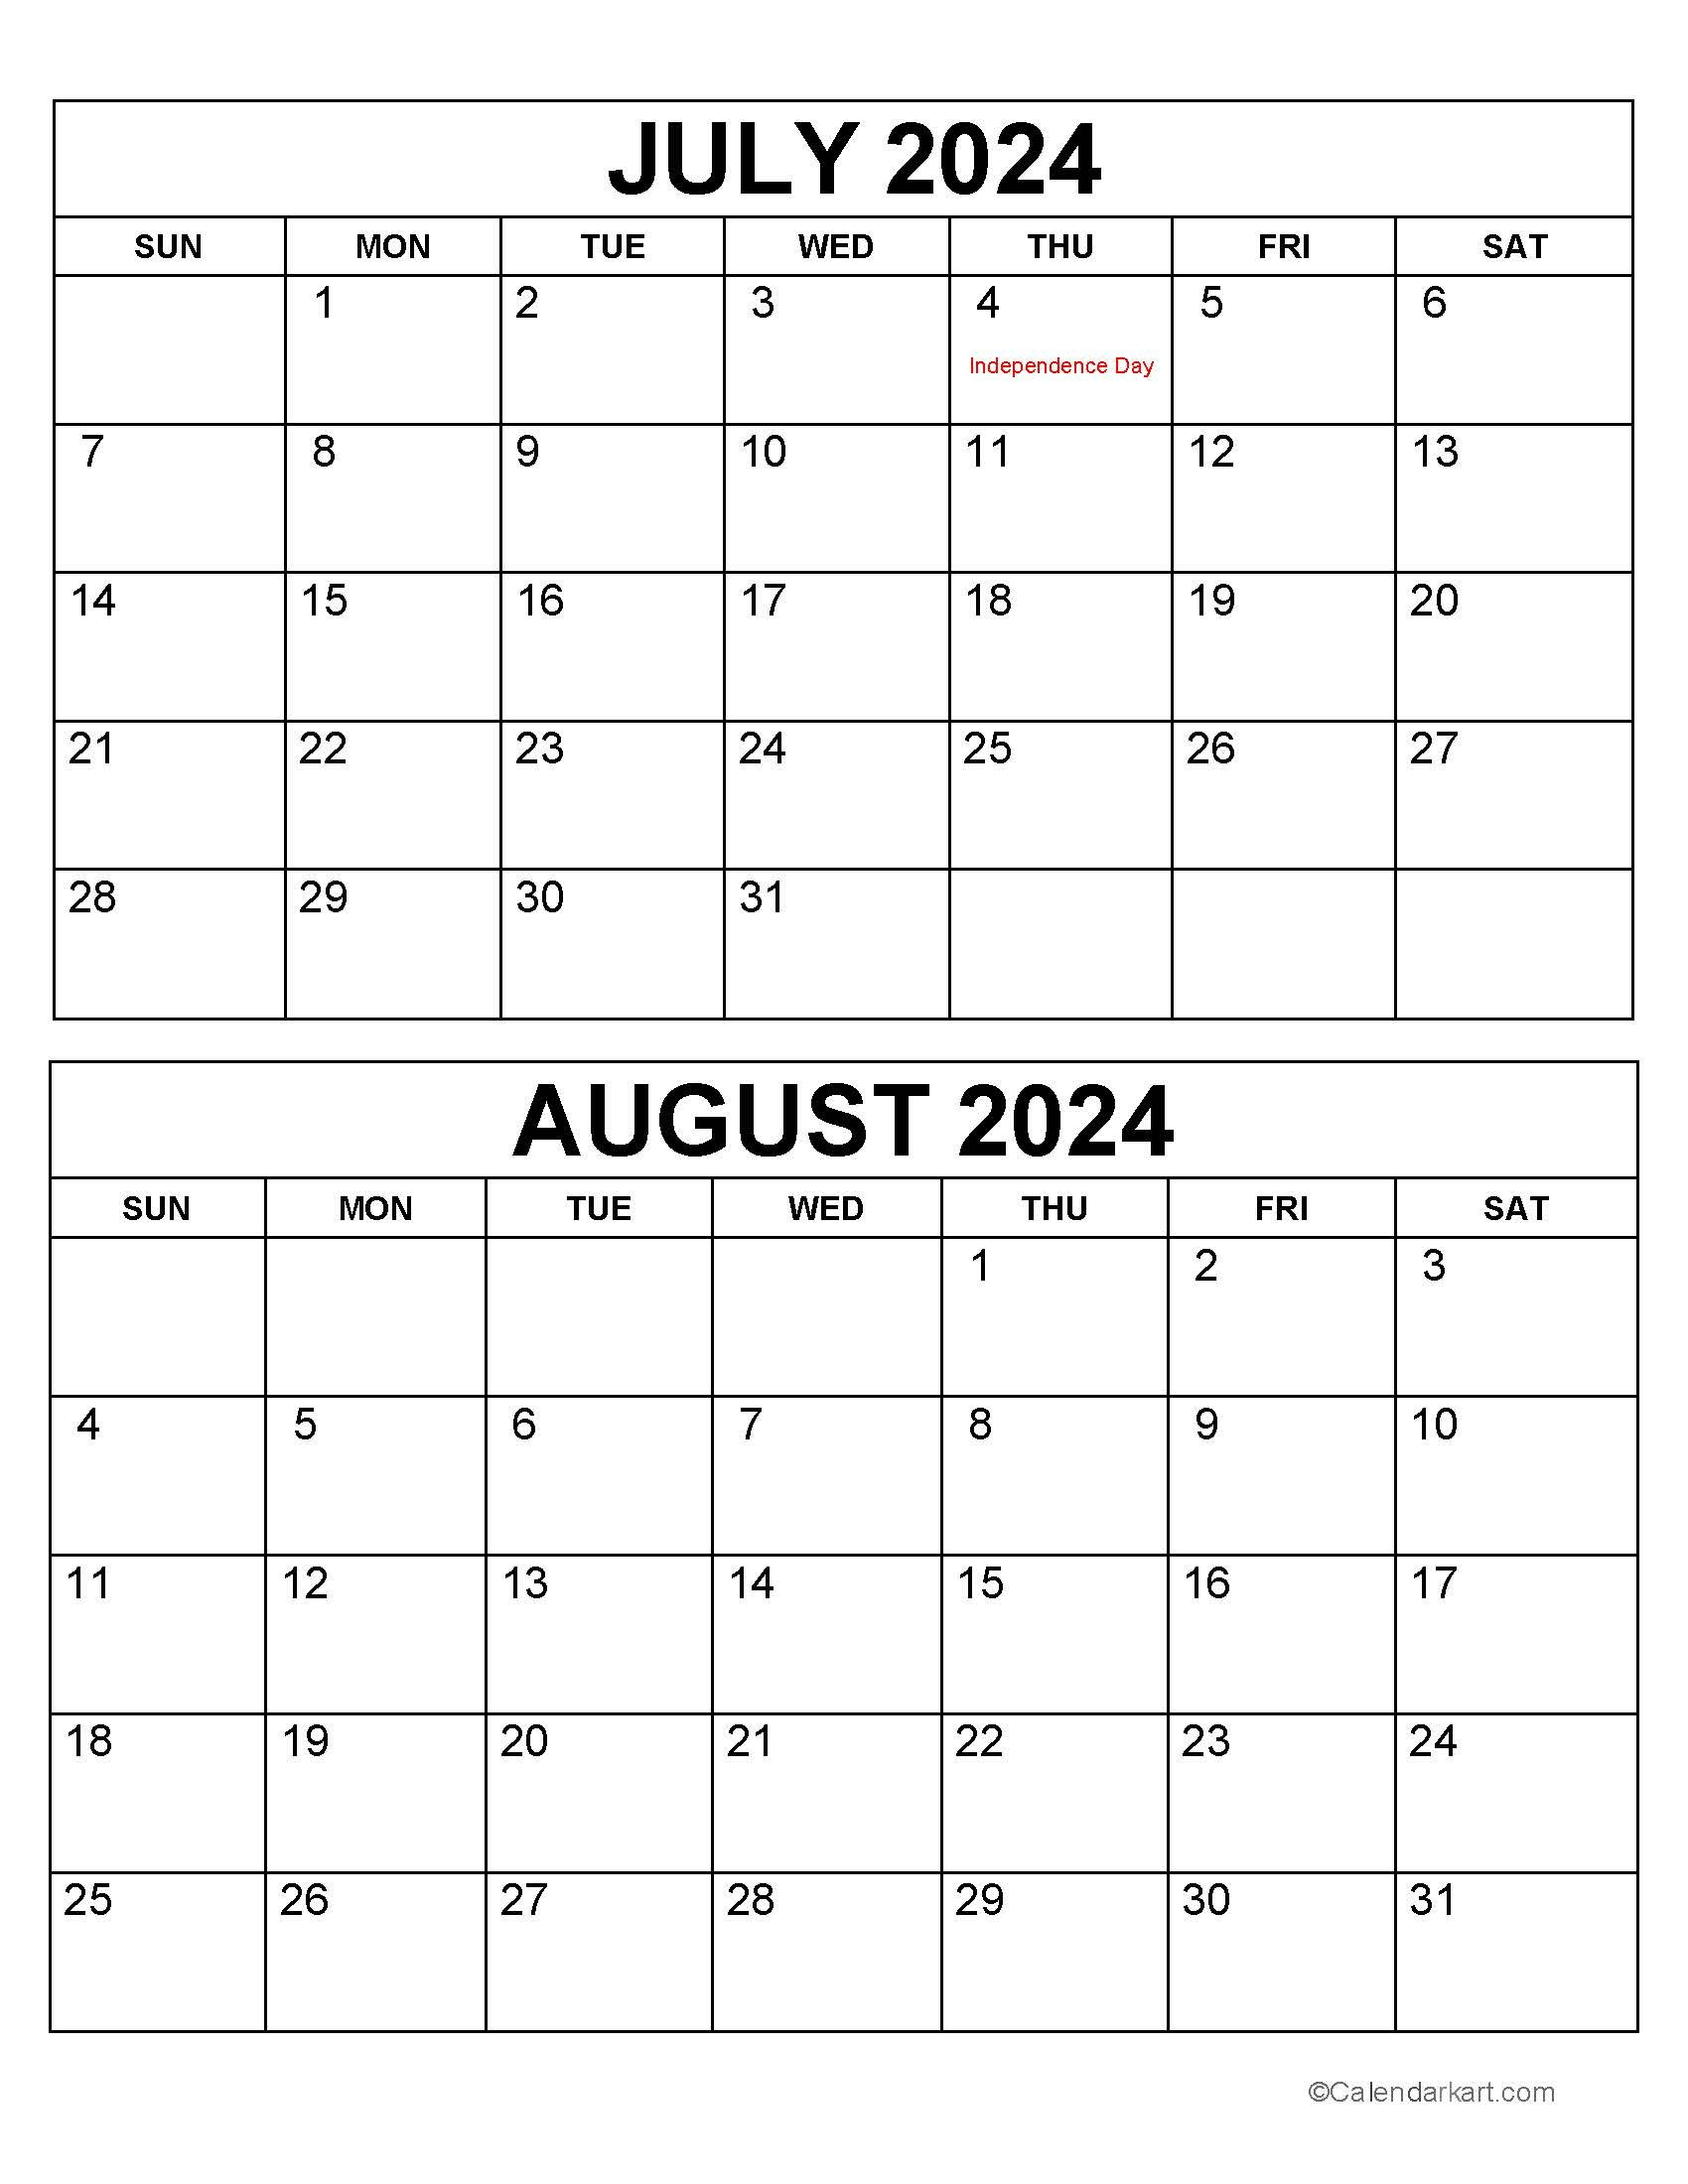 Printable July August 2024 Calendar | Calendarkart | Calendar For The Month Of July And August 2024